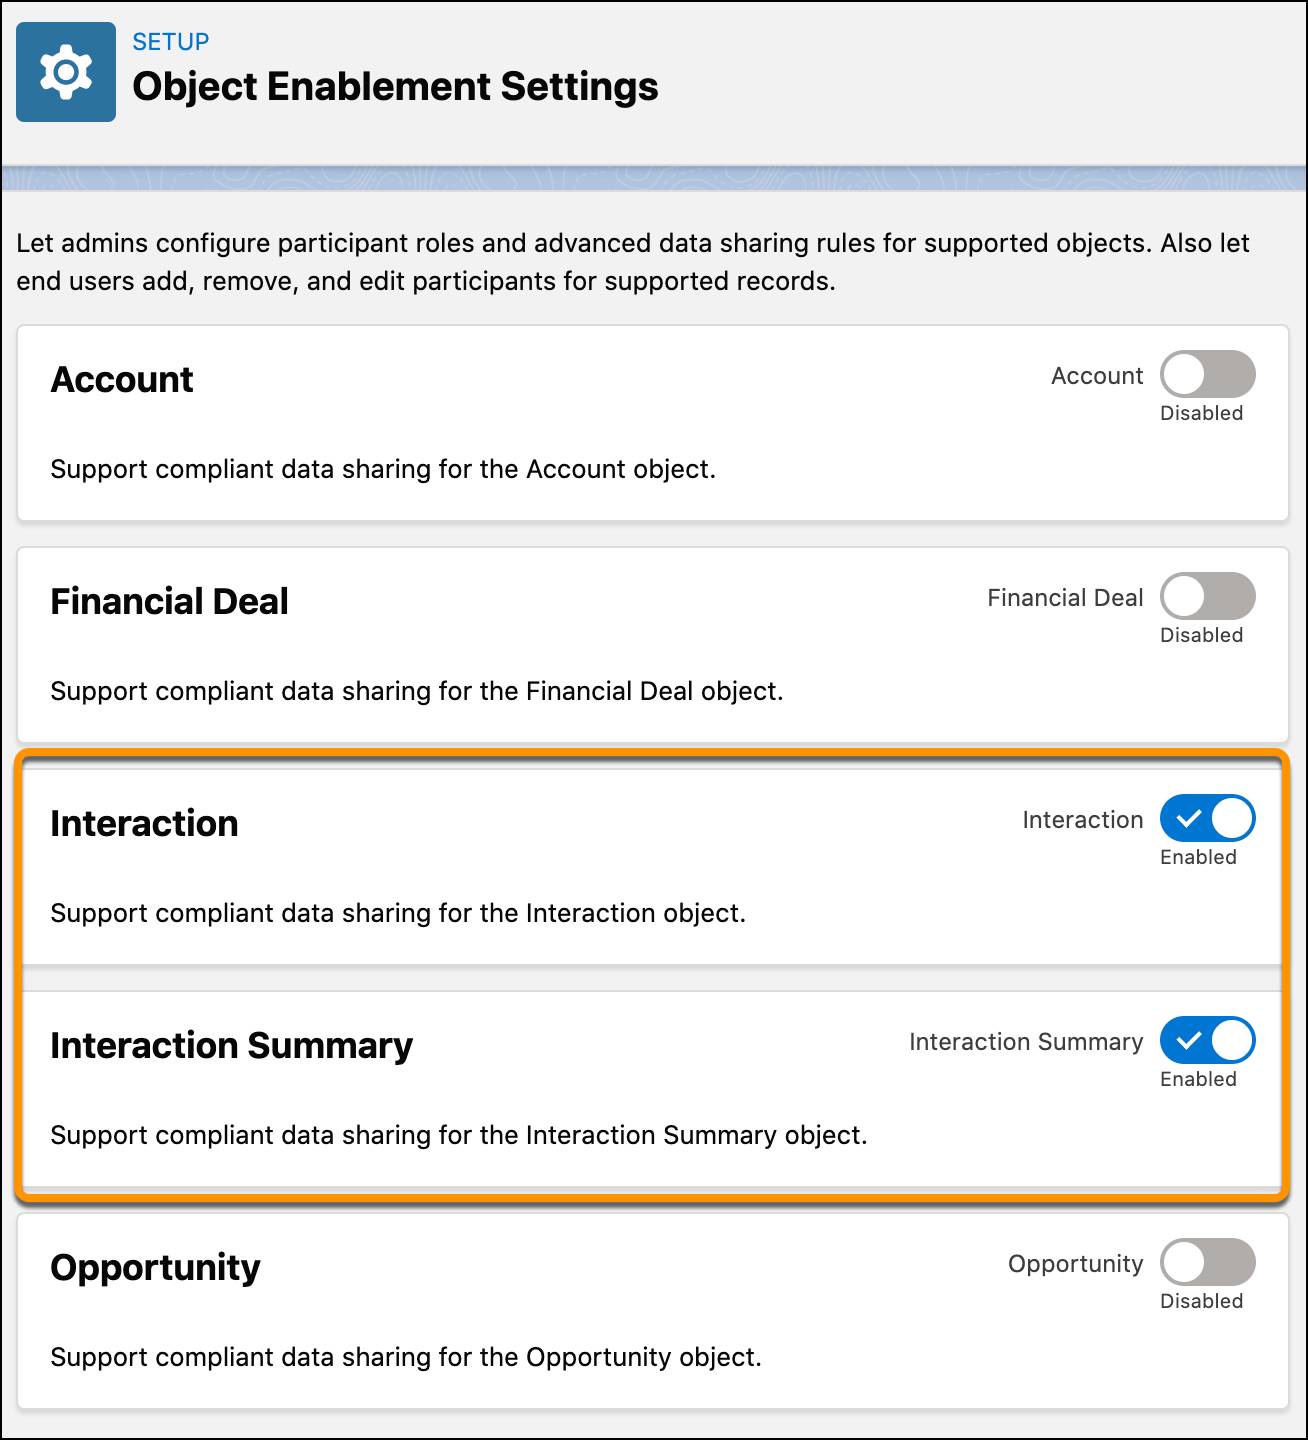 Object Enablement Settings page showing the Interaction and Interaction Summary settings enabled.